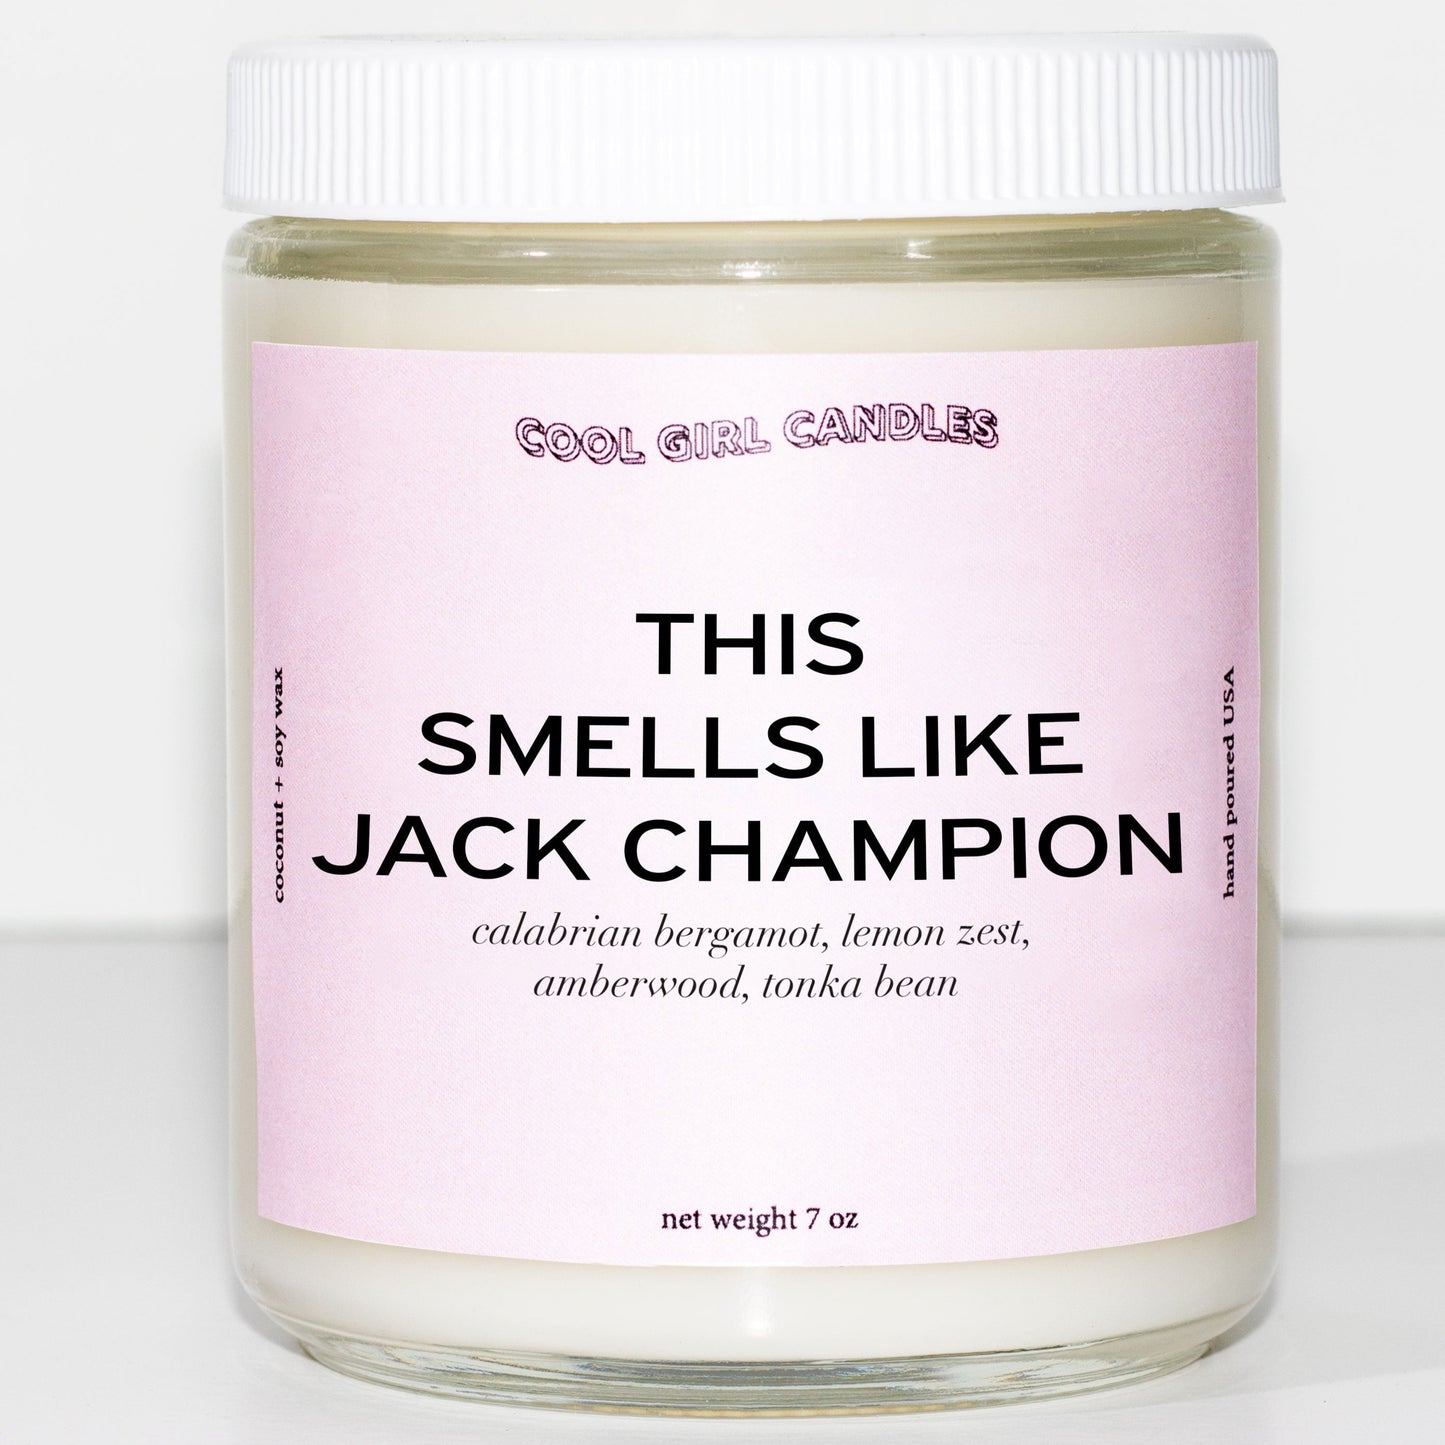 cool girl candles this smells like Jack Champion candle aesthetic pink jar candle celebrity candle dealers Jack Champion merch cute aesthetic candle